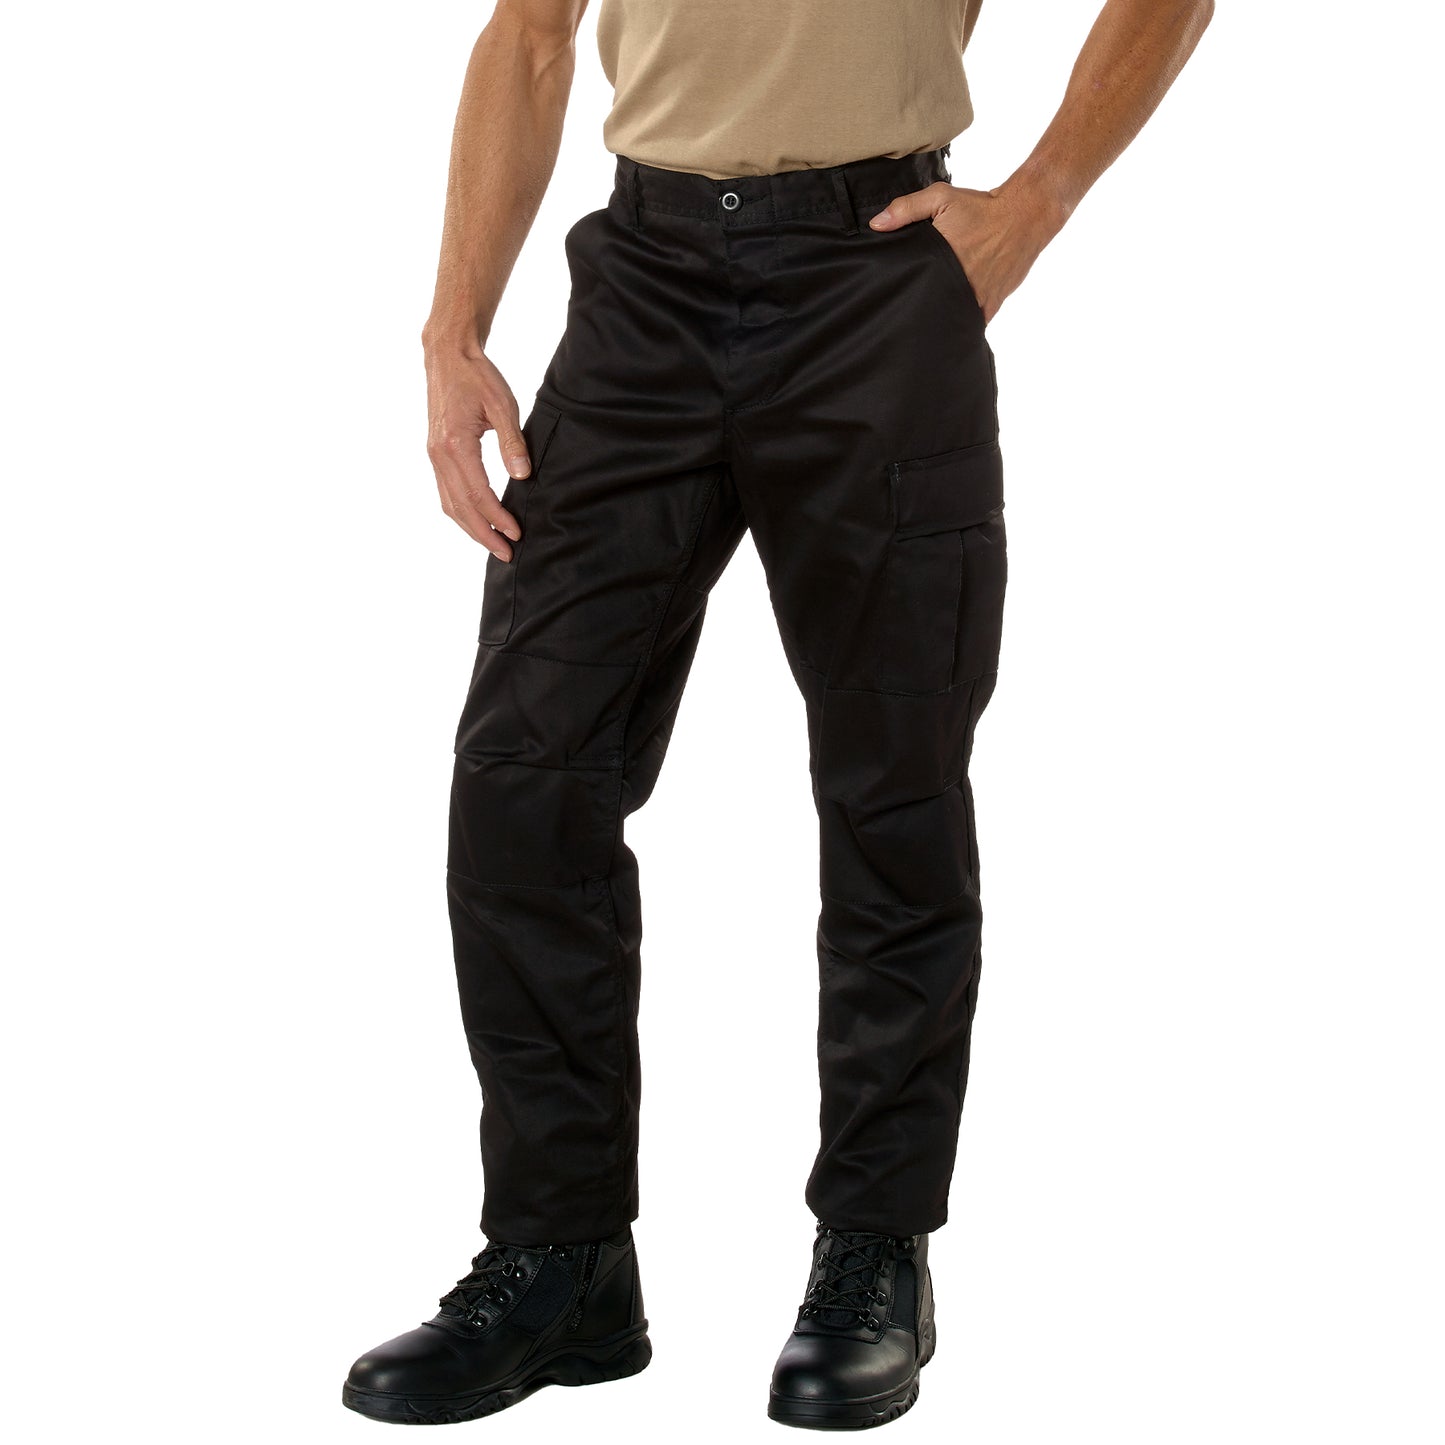 Relaxed Fit Zipper Fly BDU Pants